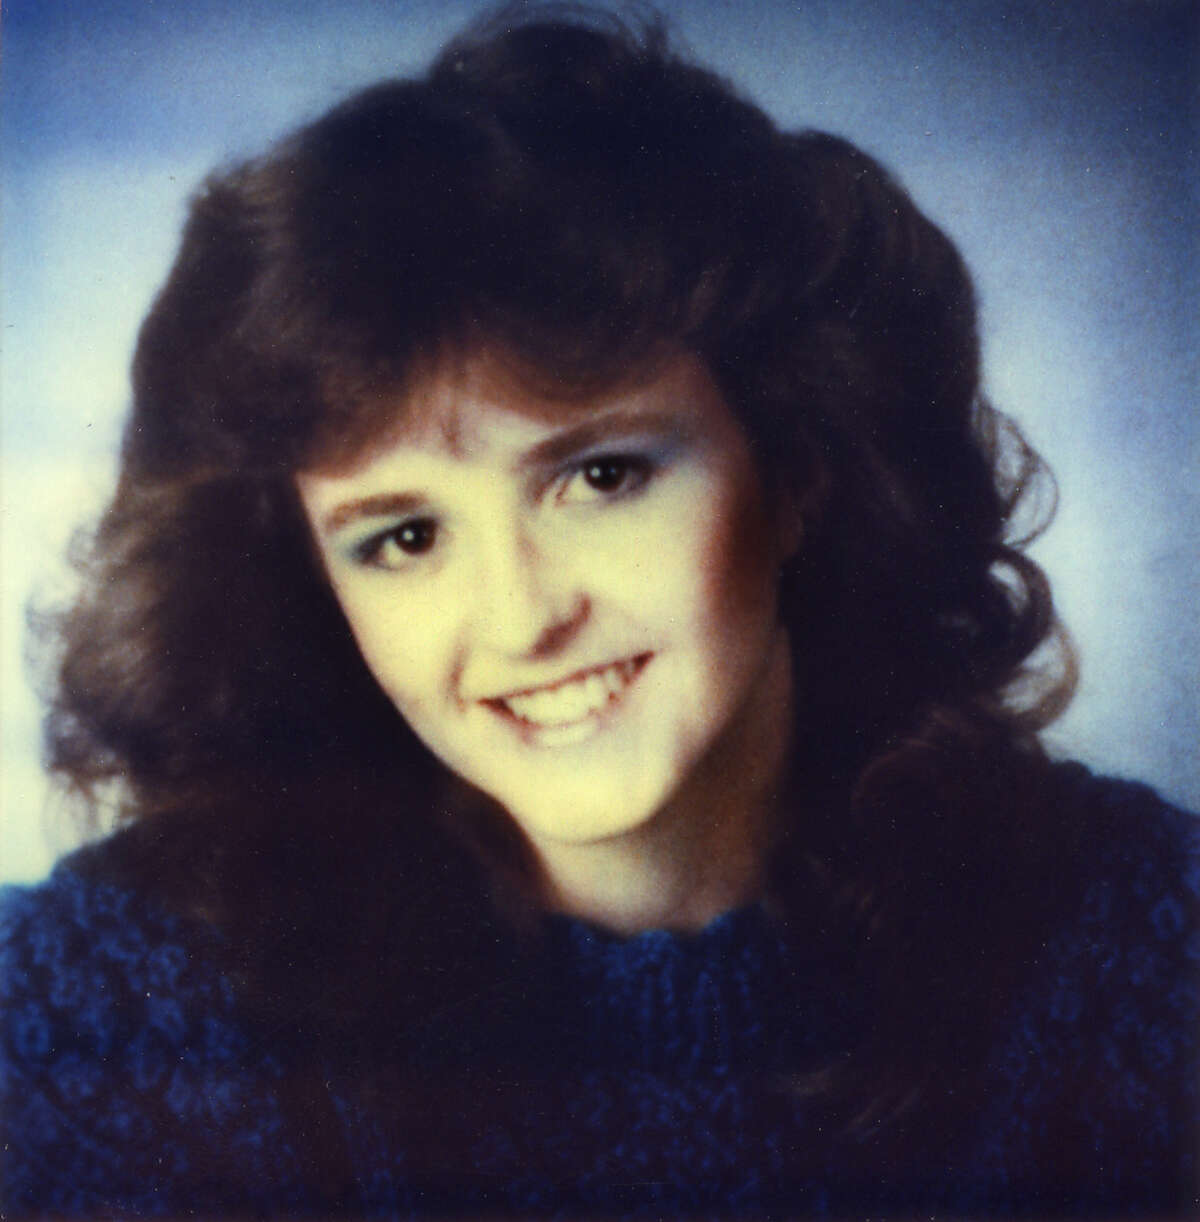 Karen L. Wilson, the University at Albany student who's been missing since 1985.